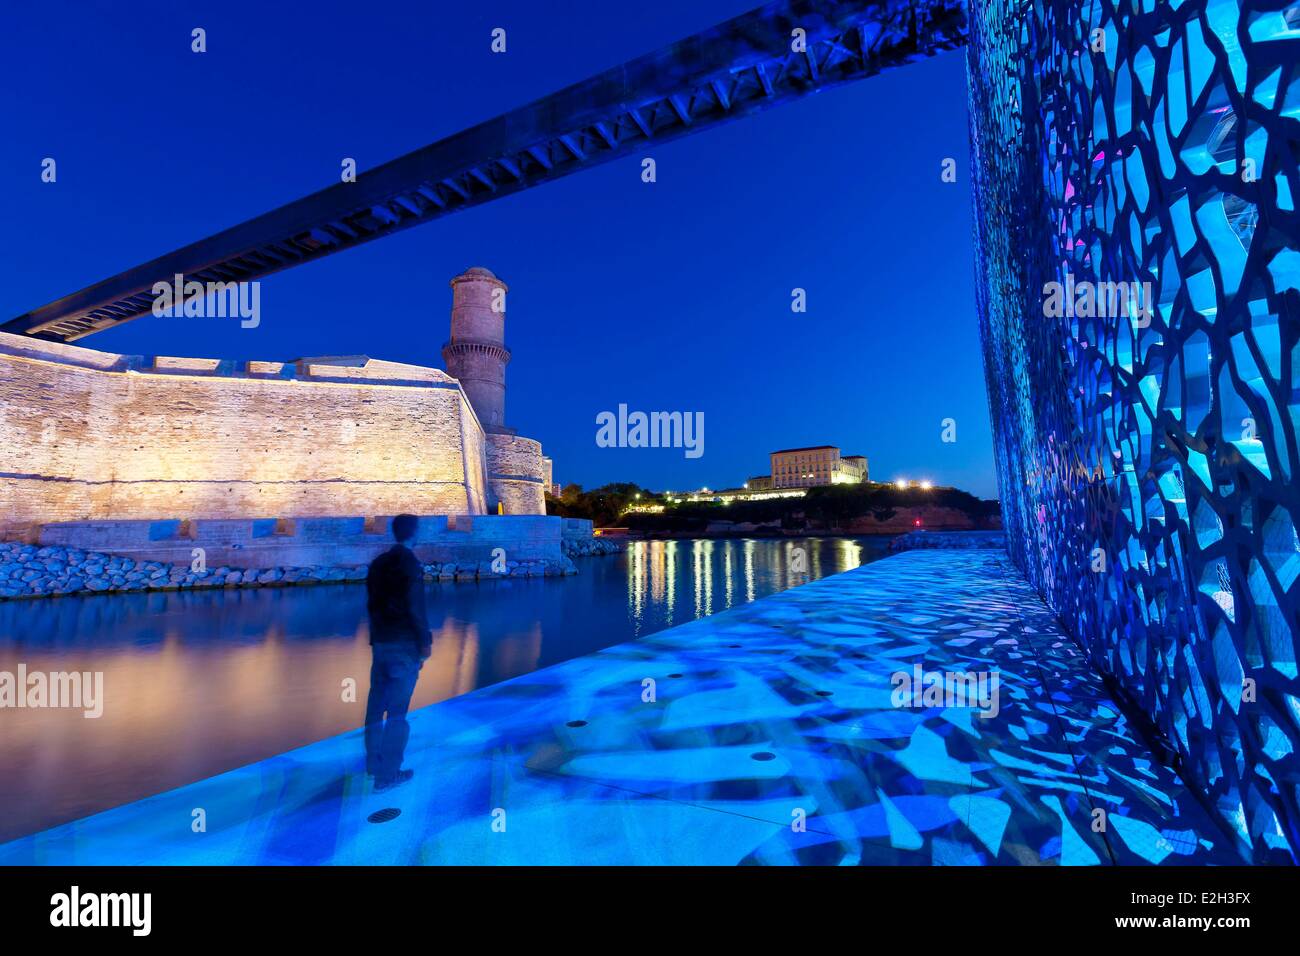 France Bouches du Rhone Marseille European capital of culture 2013 Esplanade J4 Euromed MuCEM or Museum of Civilization in Europe and Mediterranean architect Rudy Ricciotti and Roland Carta night view Stock Photo